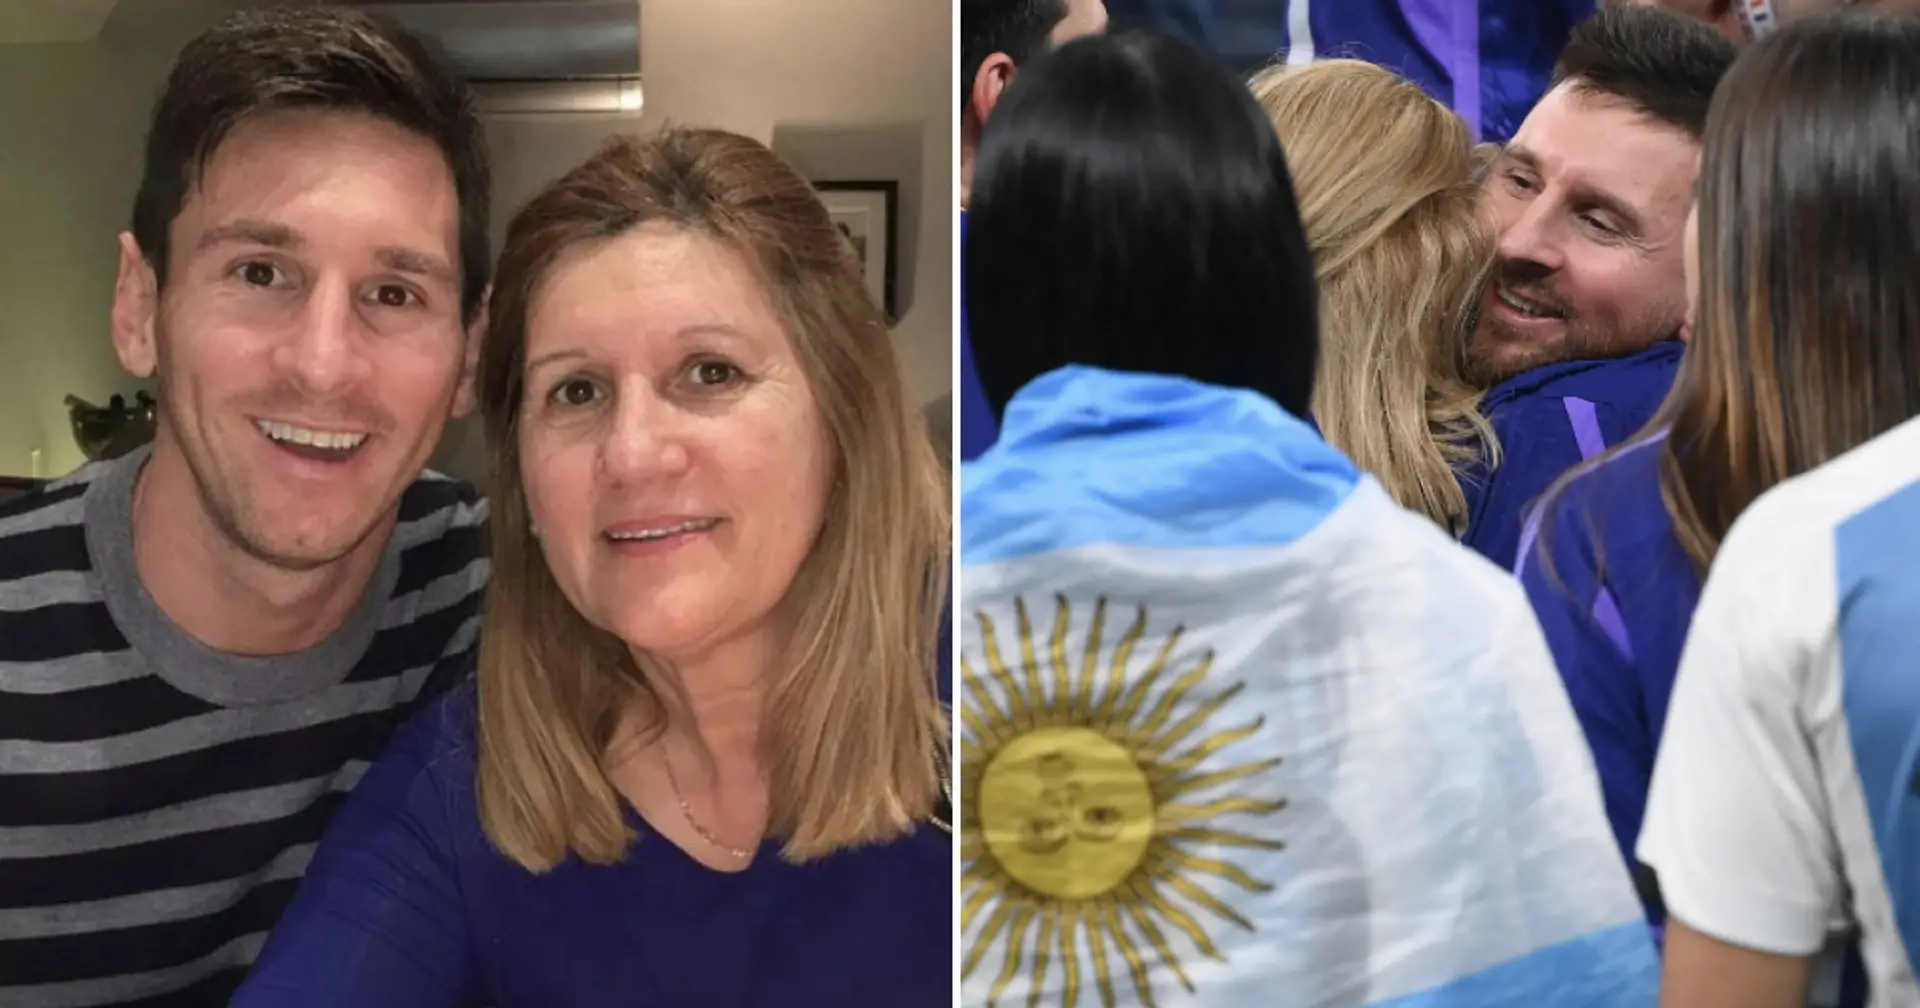 Leo Messi leaves Argentina squad to celebrate Mother's Day with his mom in Rosario